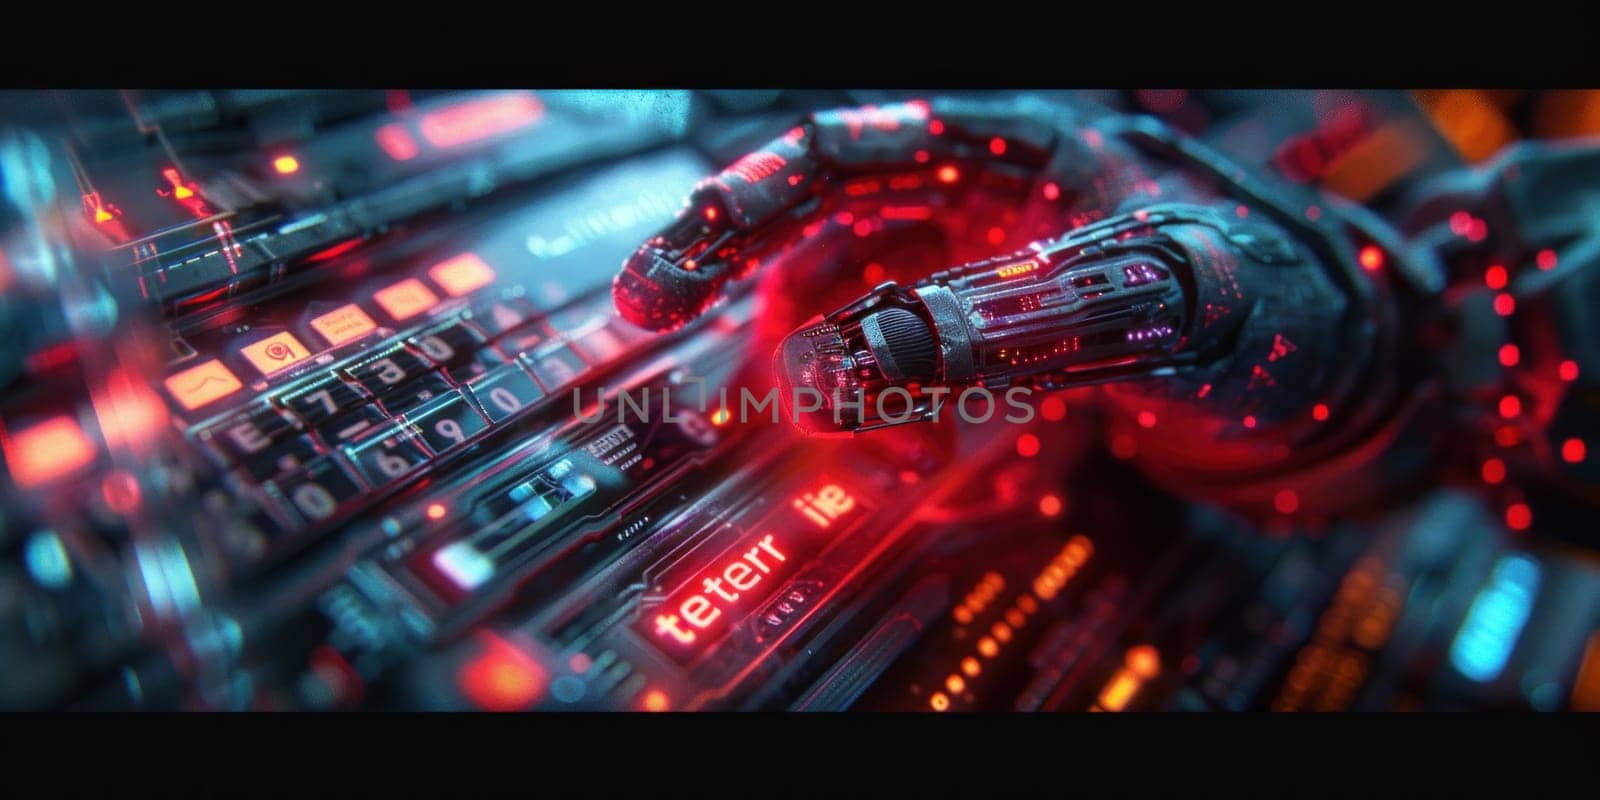 Close Up of Futuristic Device With Red Lights by but_photo